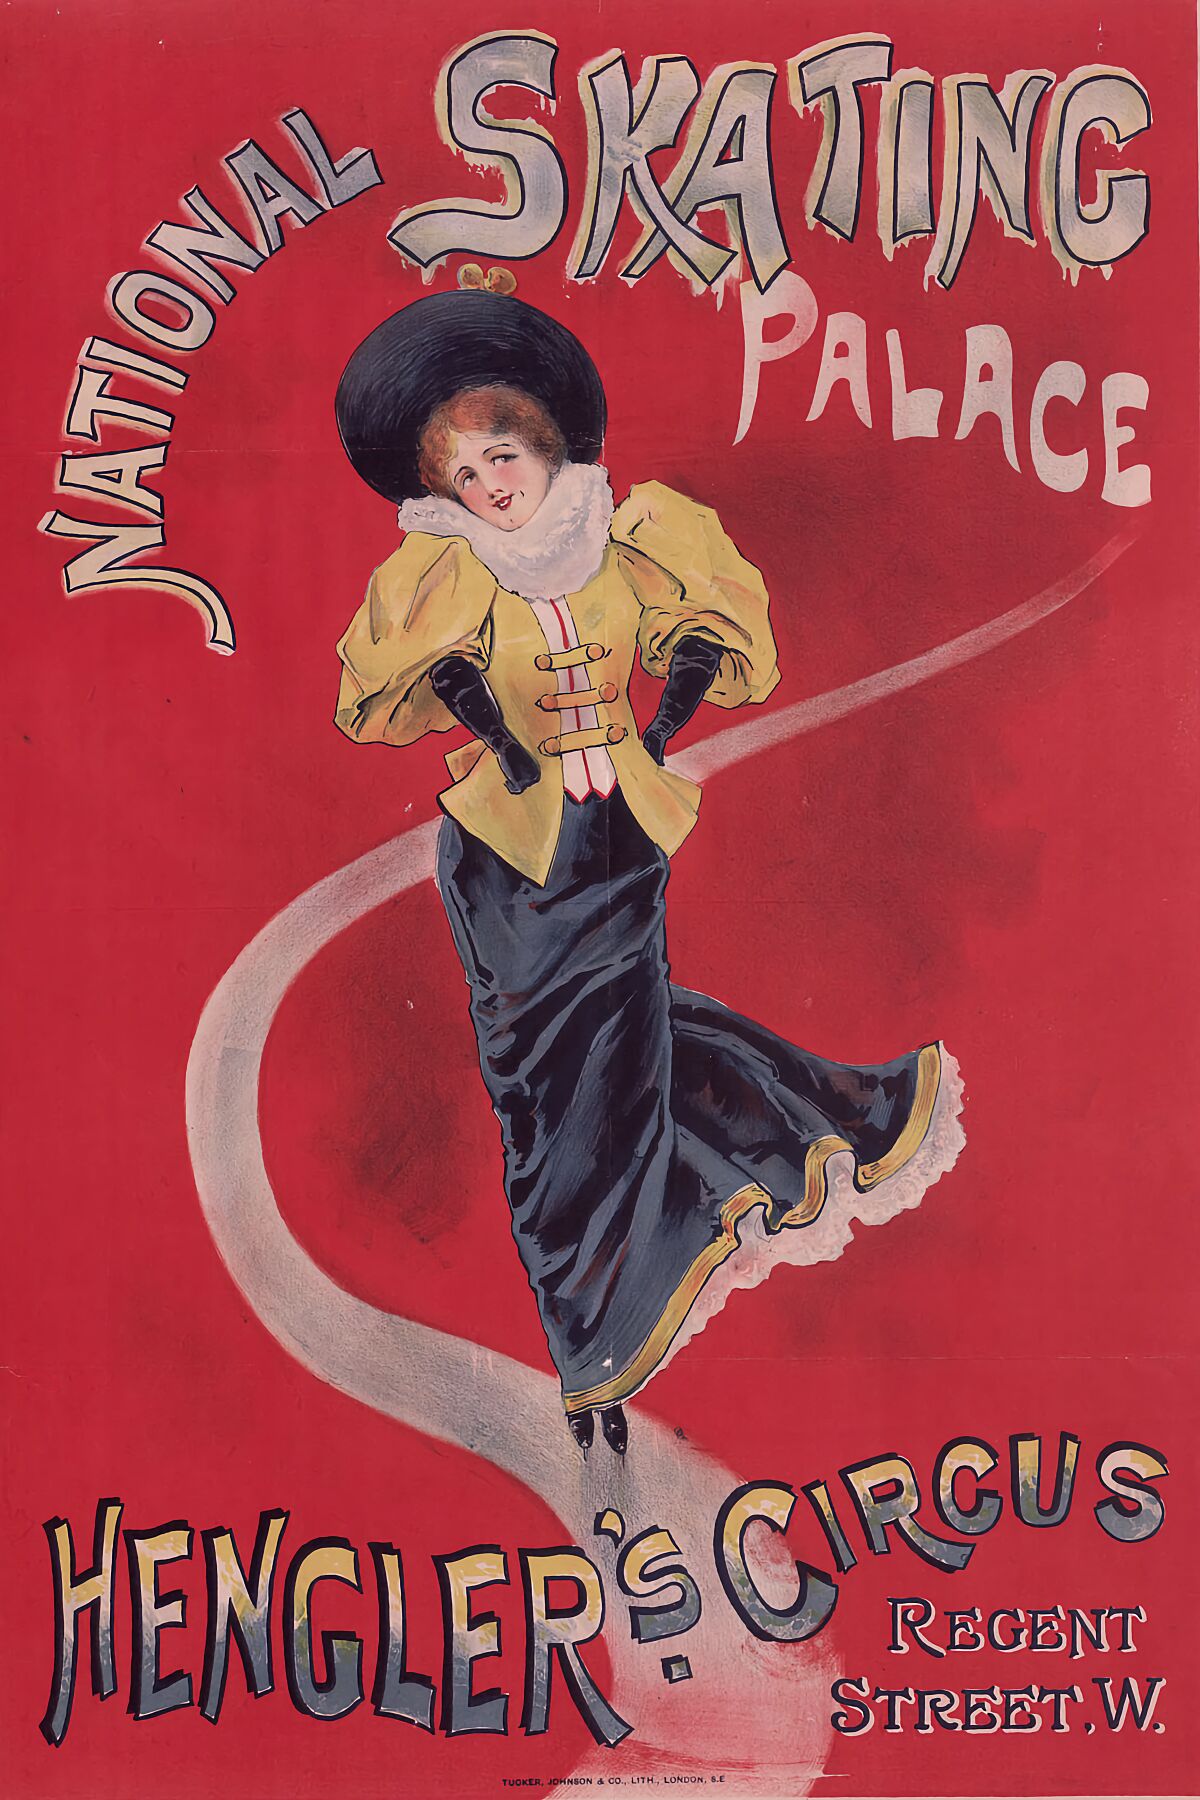 Advertisement for the National Skating Palace ice rink, 1895